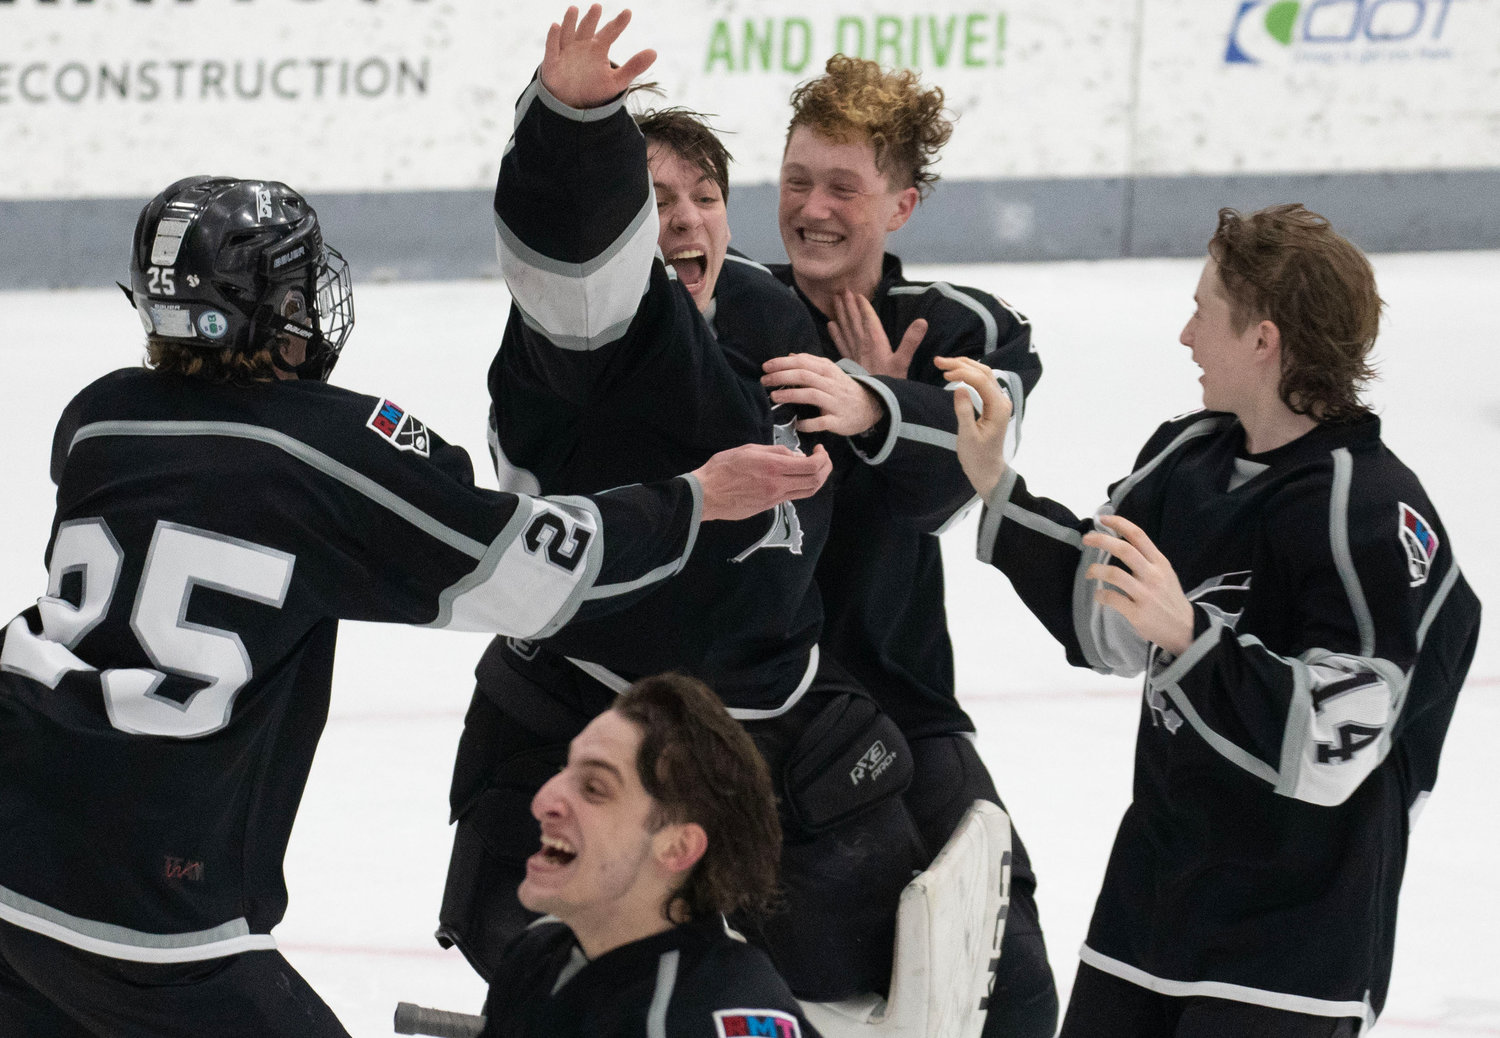 Teammates celebrate with Max Braun (mid-right) after the victory.